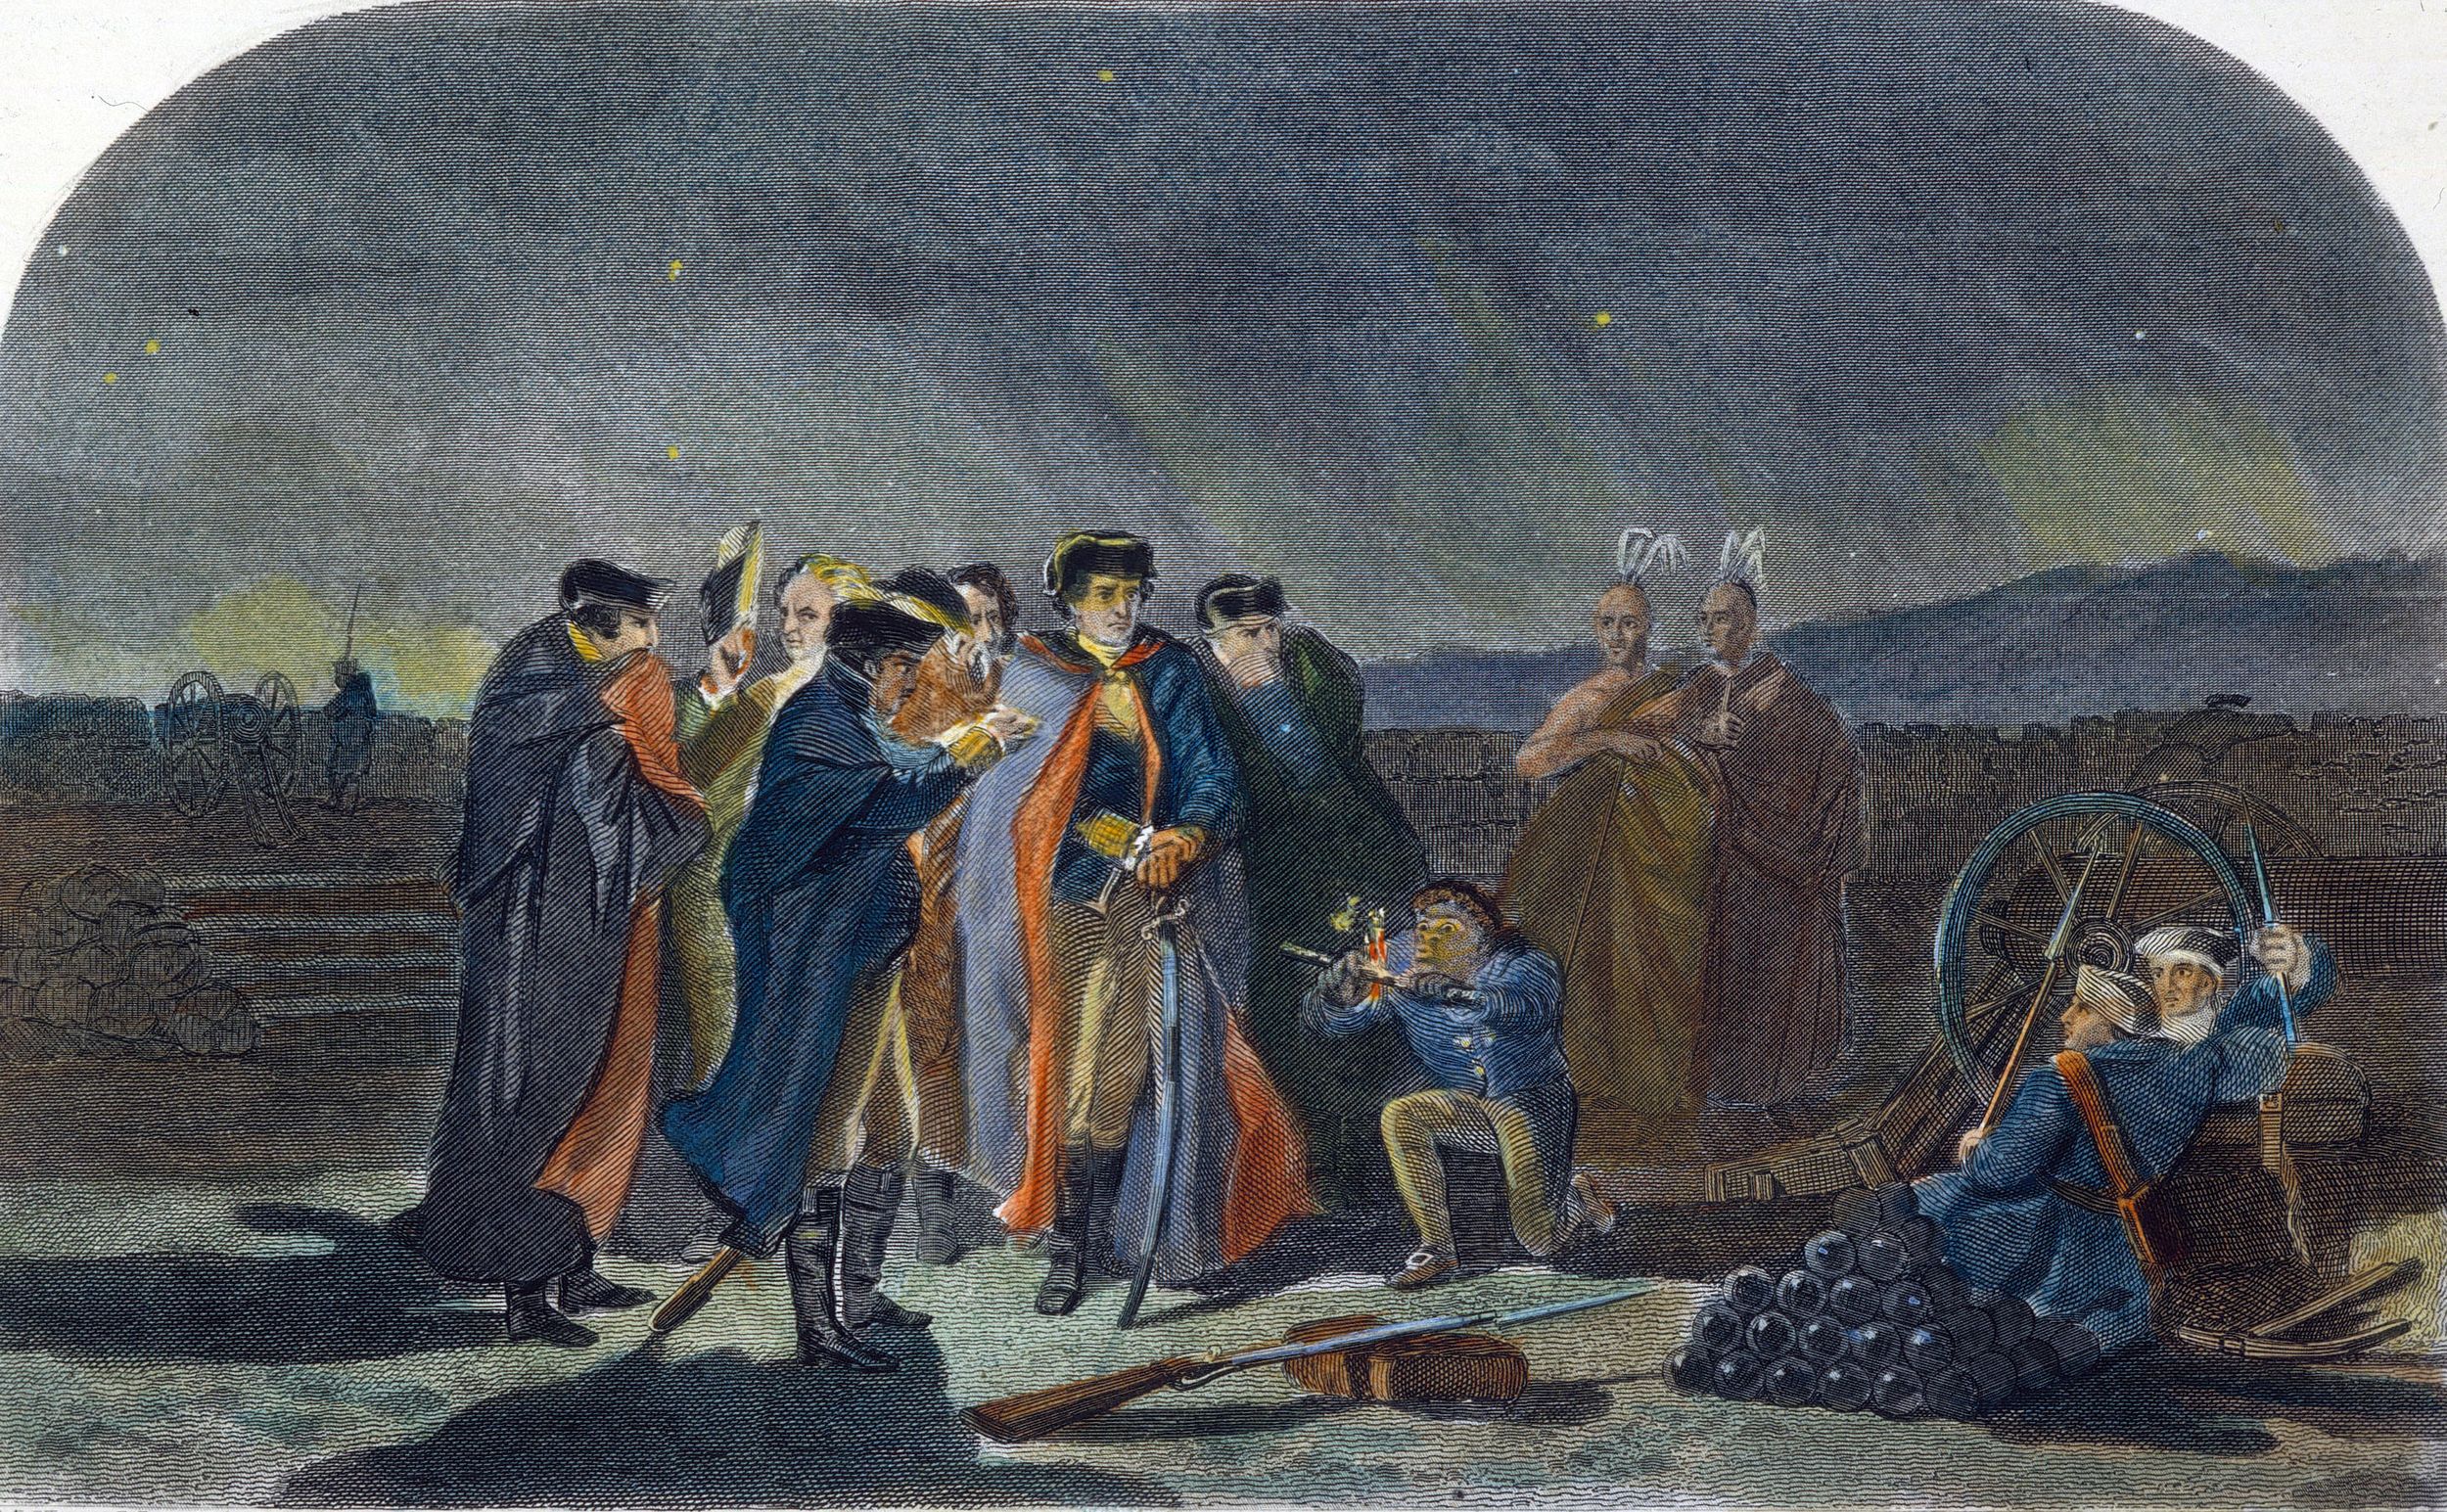 George Washington and his staff inside Fort Necessity on the night before he capitulated to the French—ironically, on July 4.